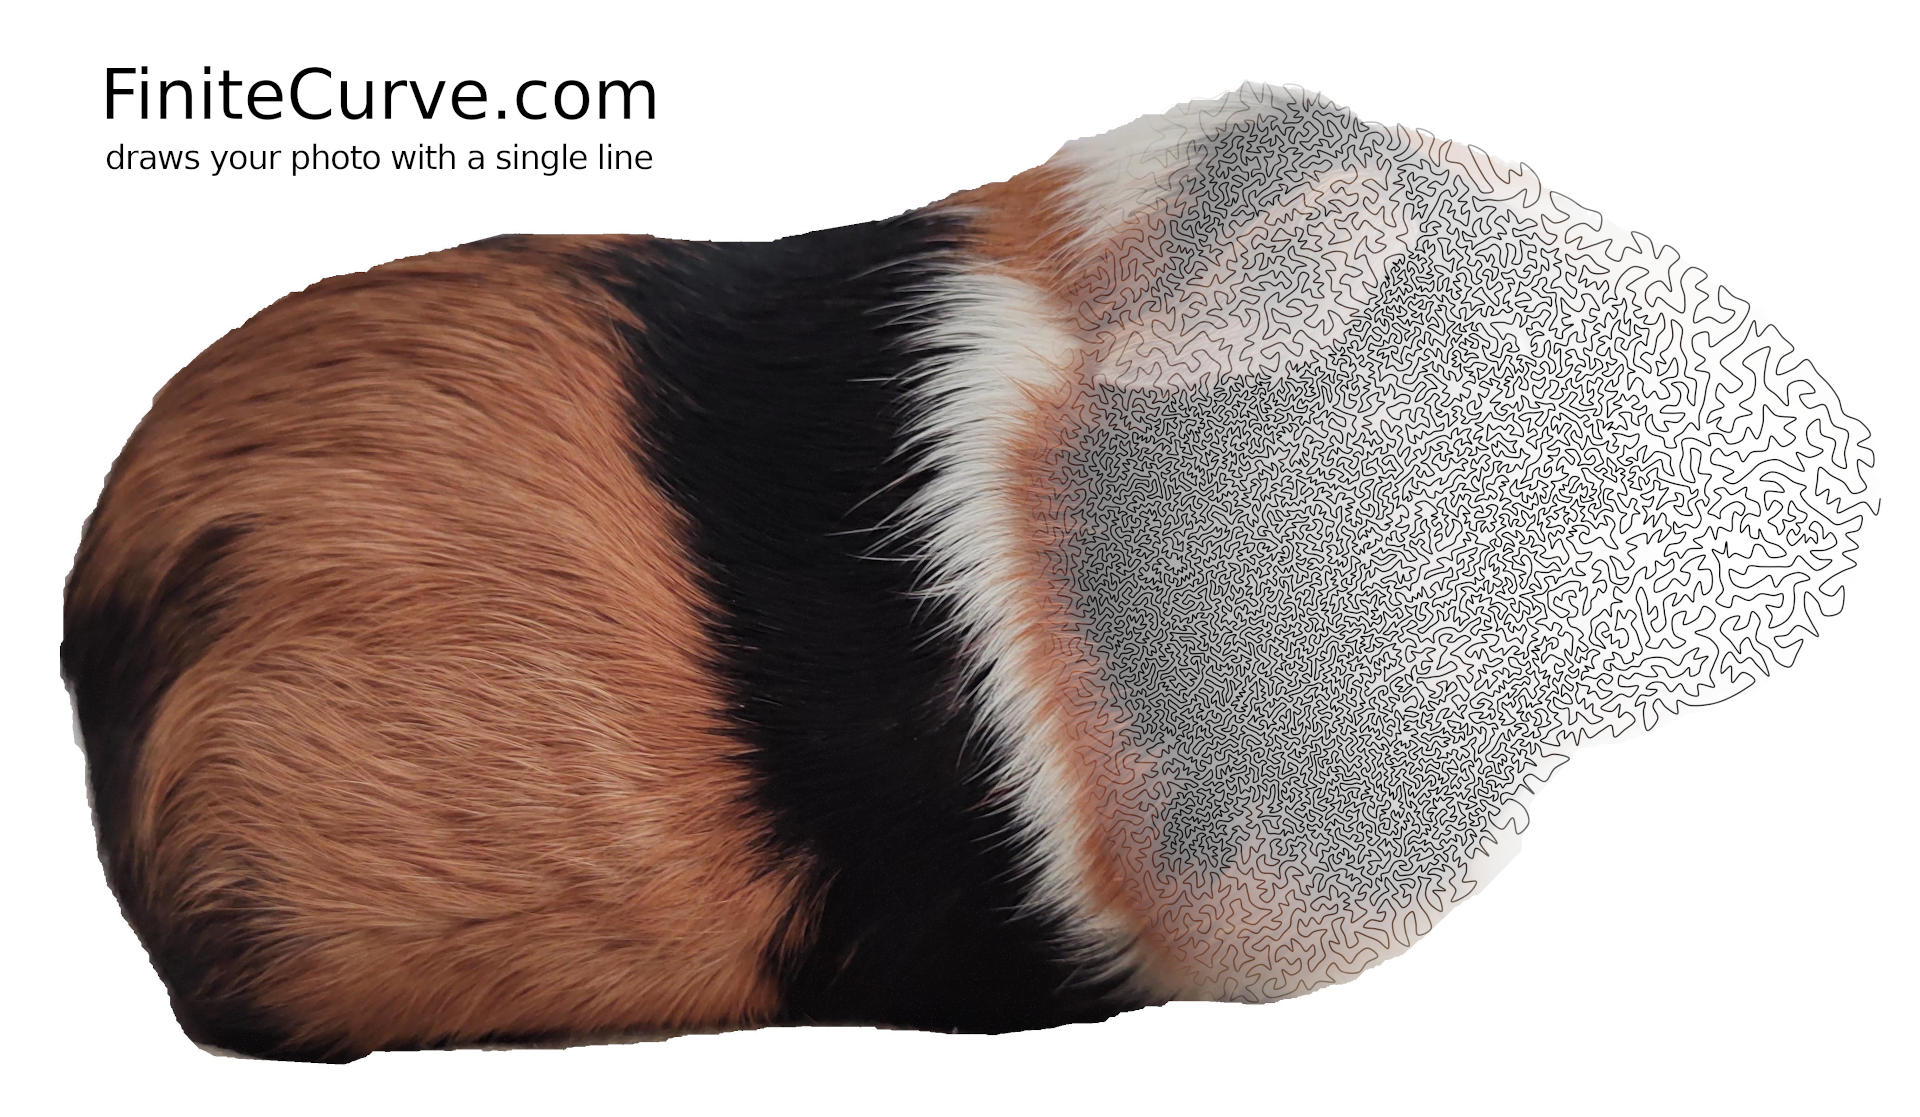 A long, winding, space-filling curve with varying density, resulting in a grayscale guinea pig